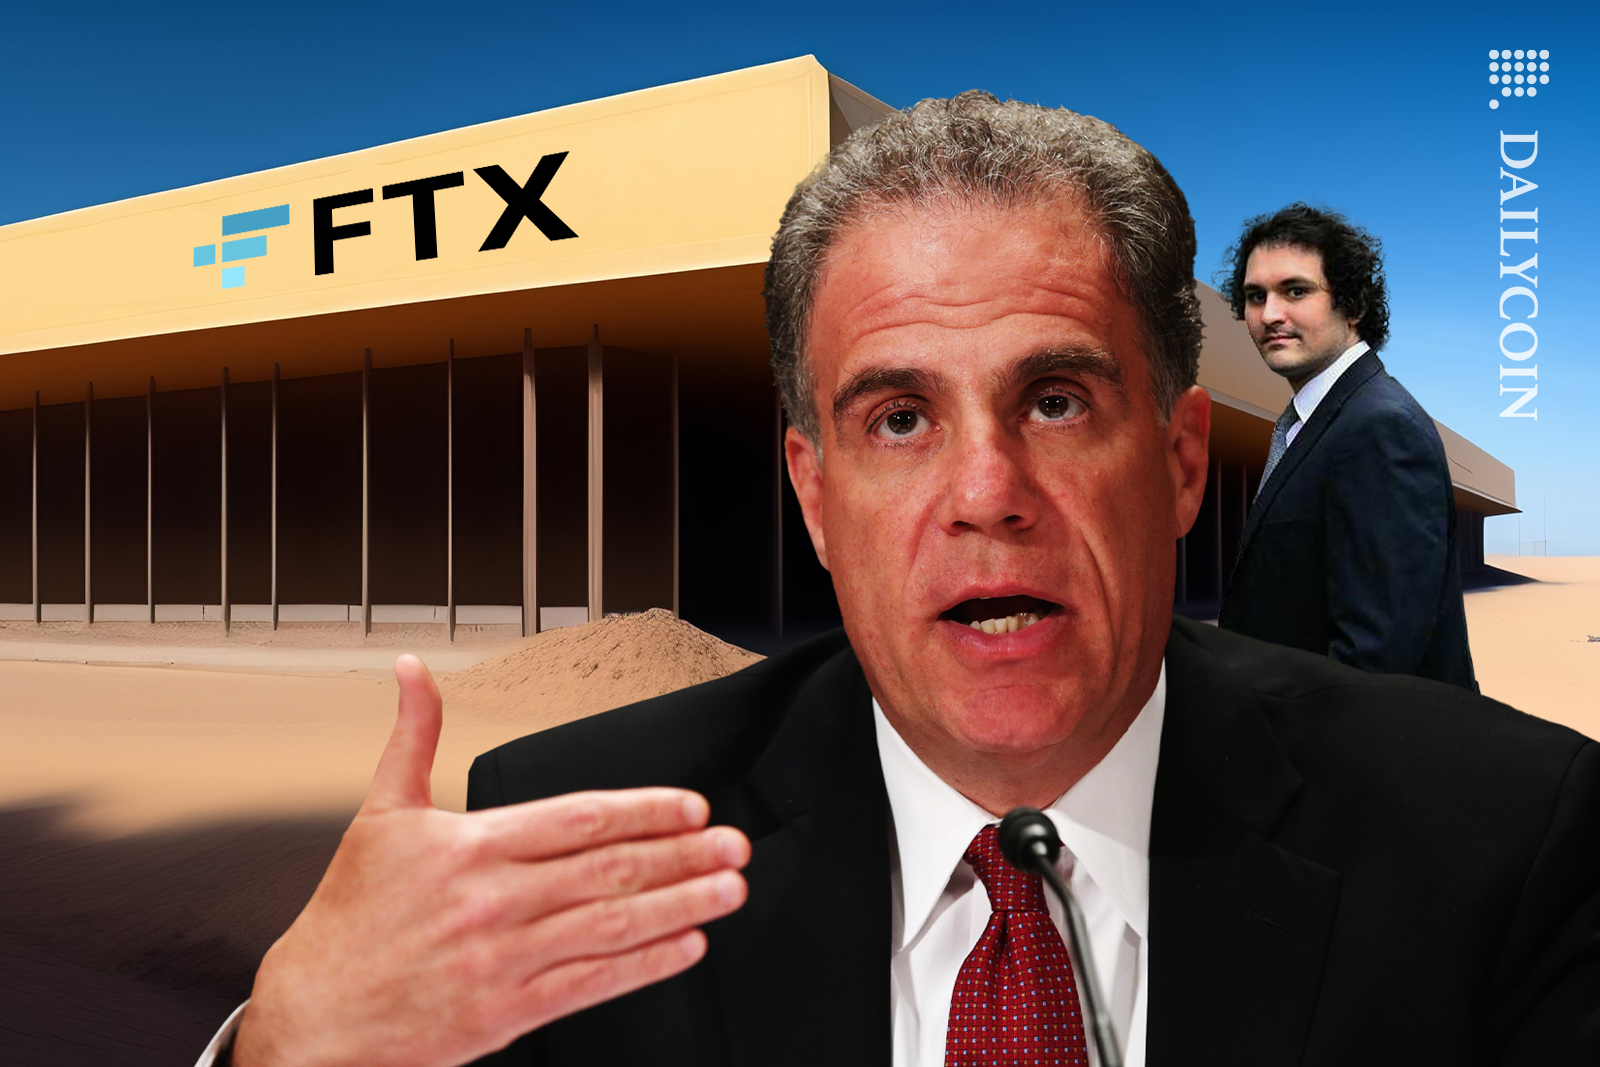 DOJ- Michael E. Horowitz concerned about FTX history with Sam Bankman.